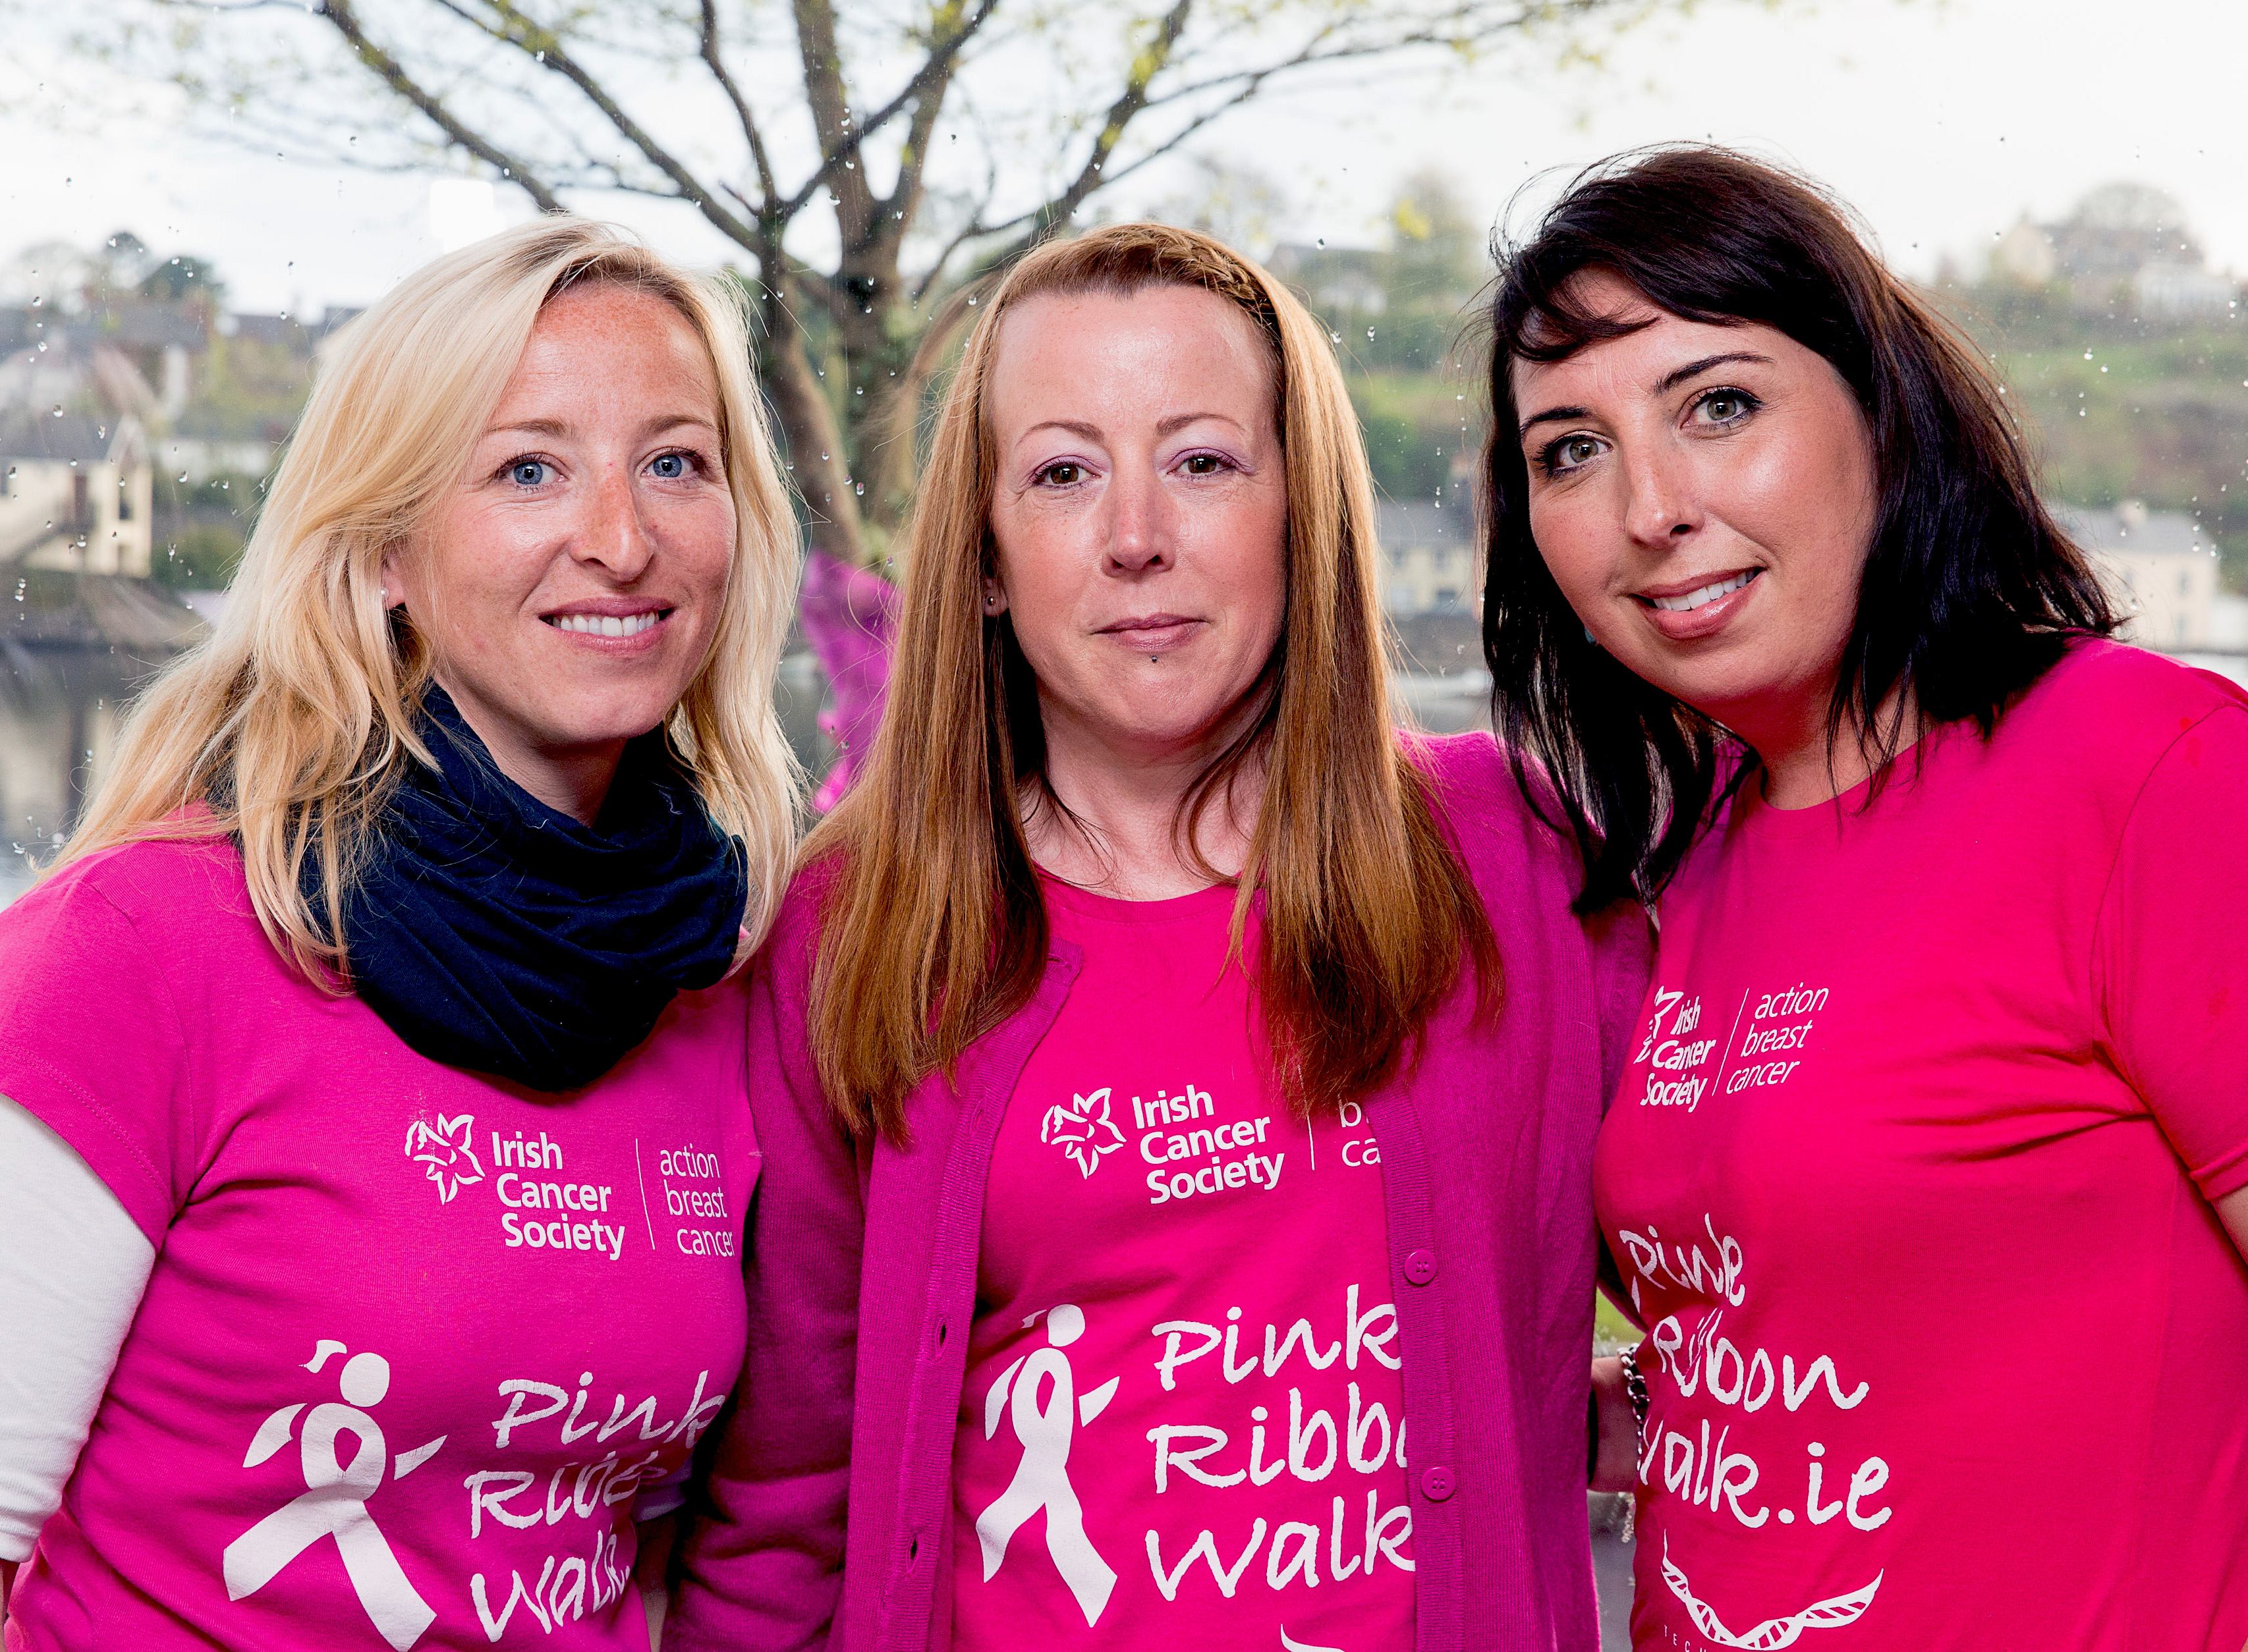 Killaloe Pink Ribbon Walk in 2015 to continue raising funds for worthy resources